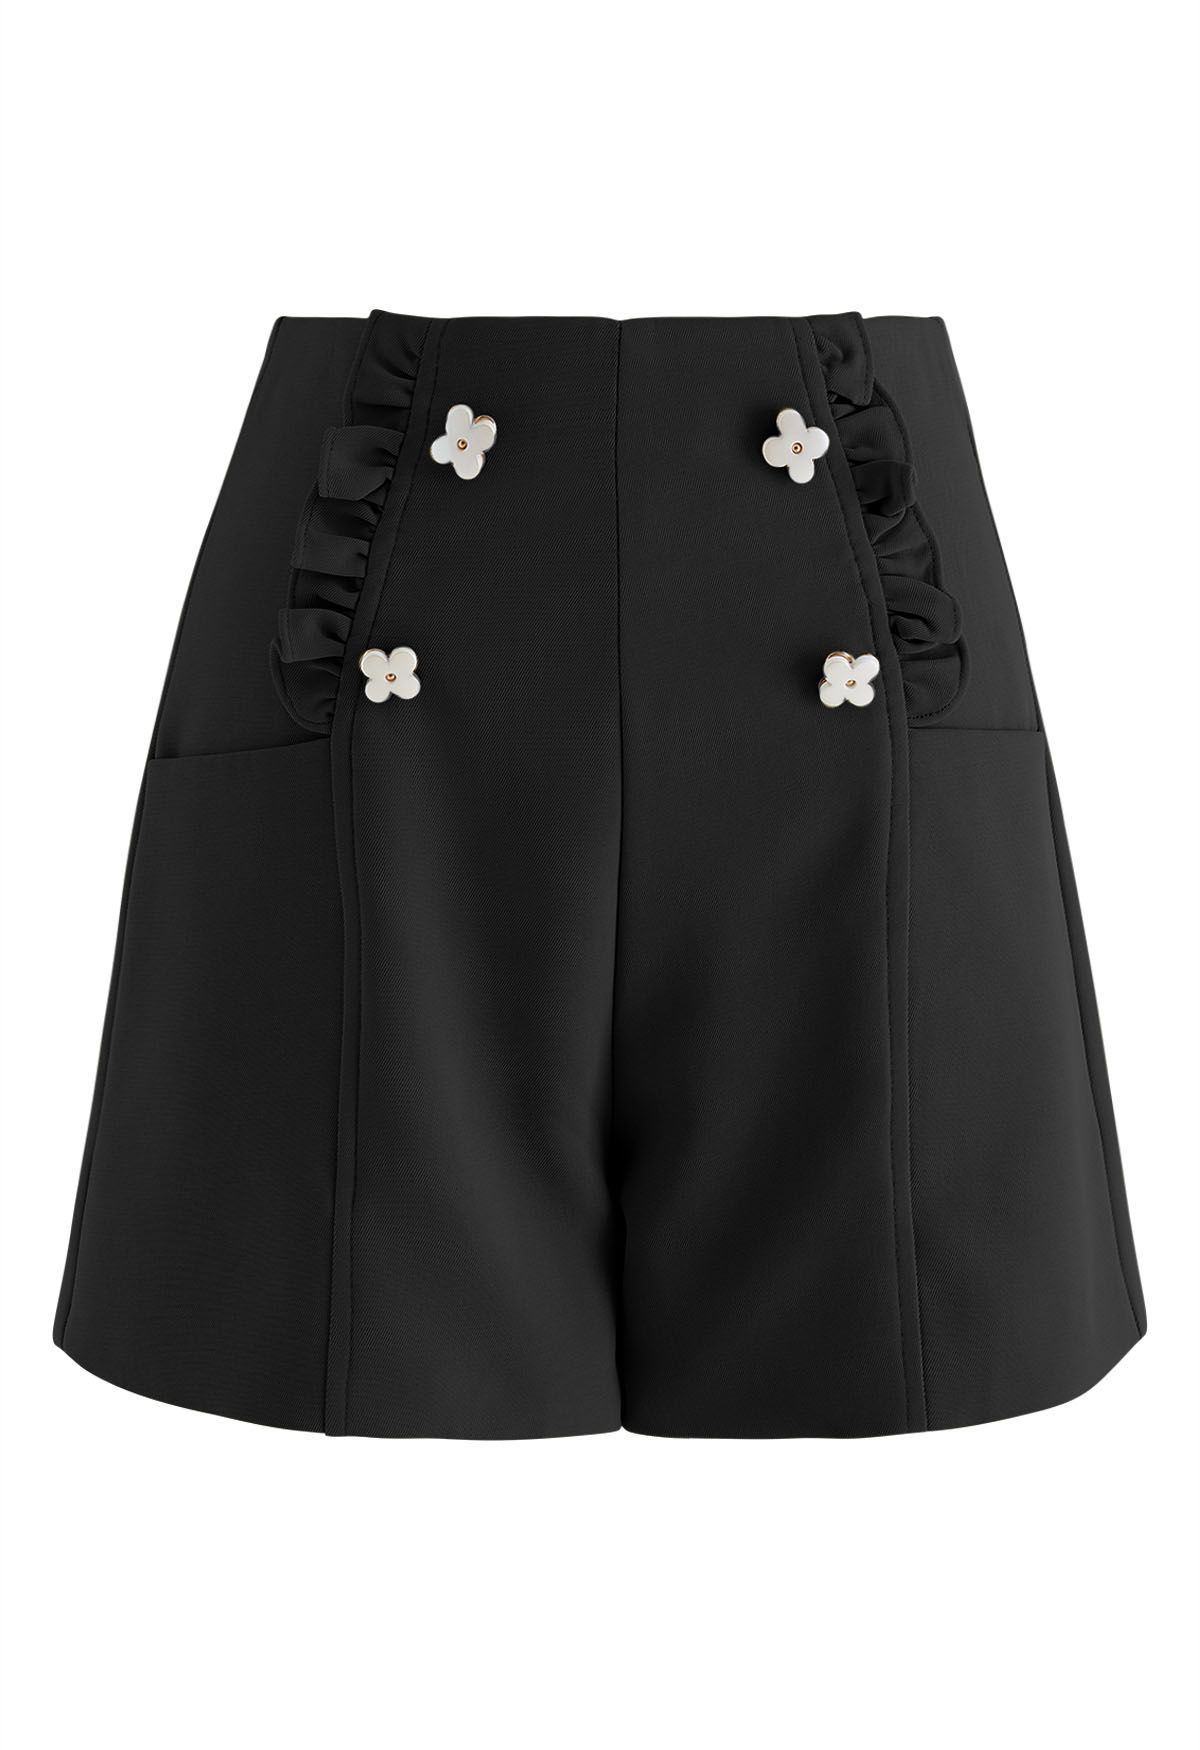 Adorable Flower Ruffle Trim Shorts in Black | Chicwish